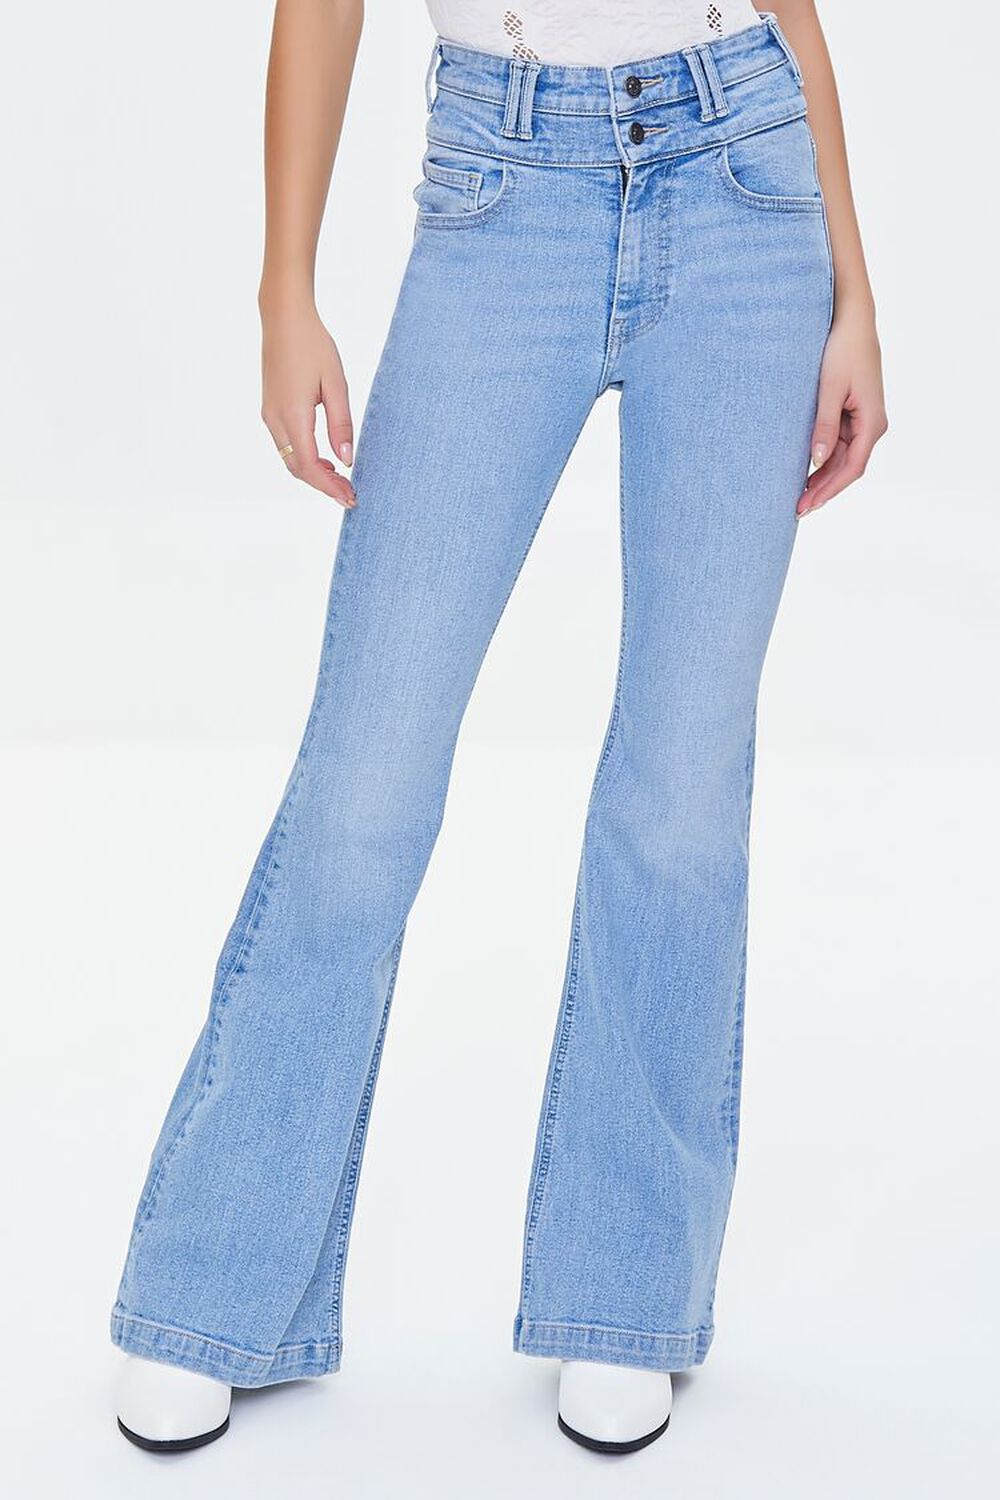 MEDIUM DENIM Recycled Cotton High-Rise Flare Jeans, image 1